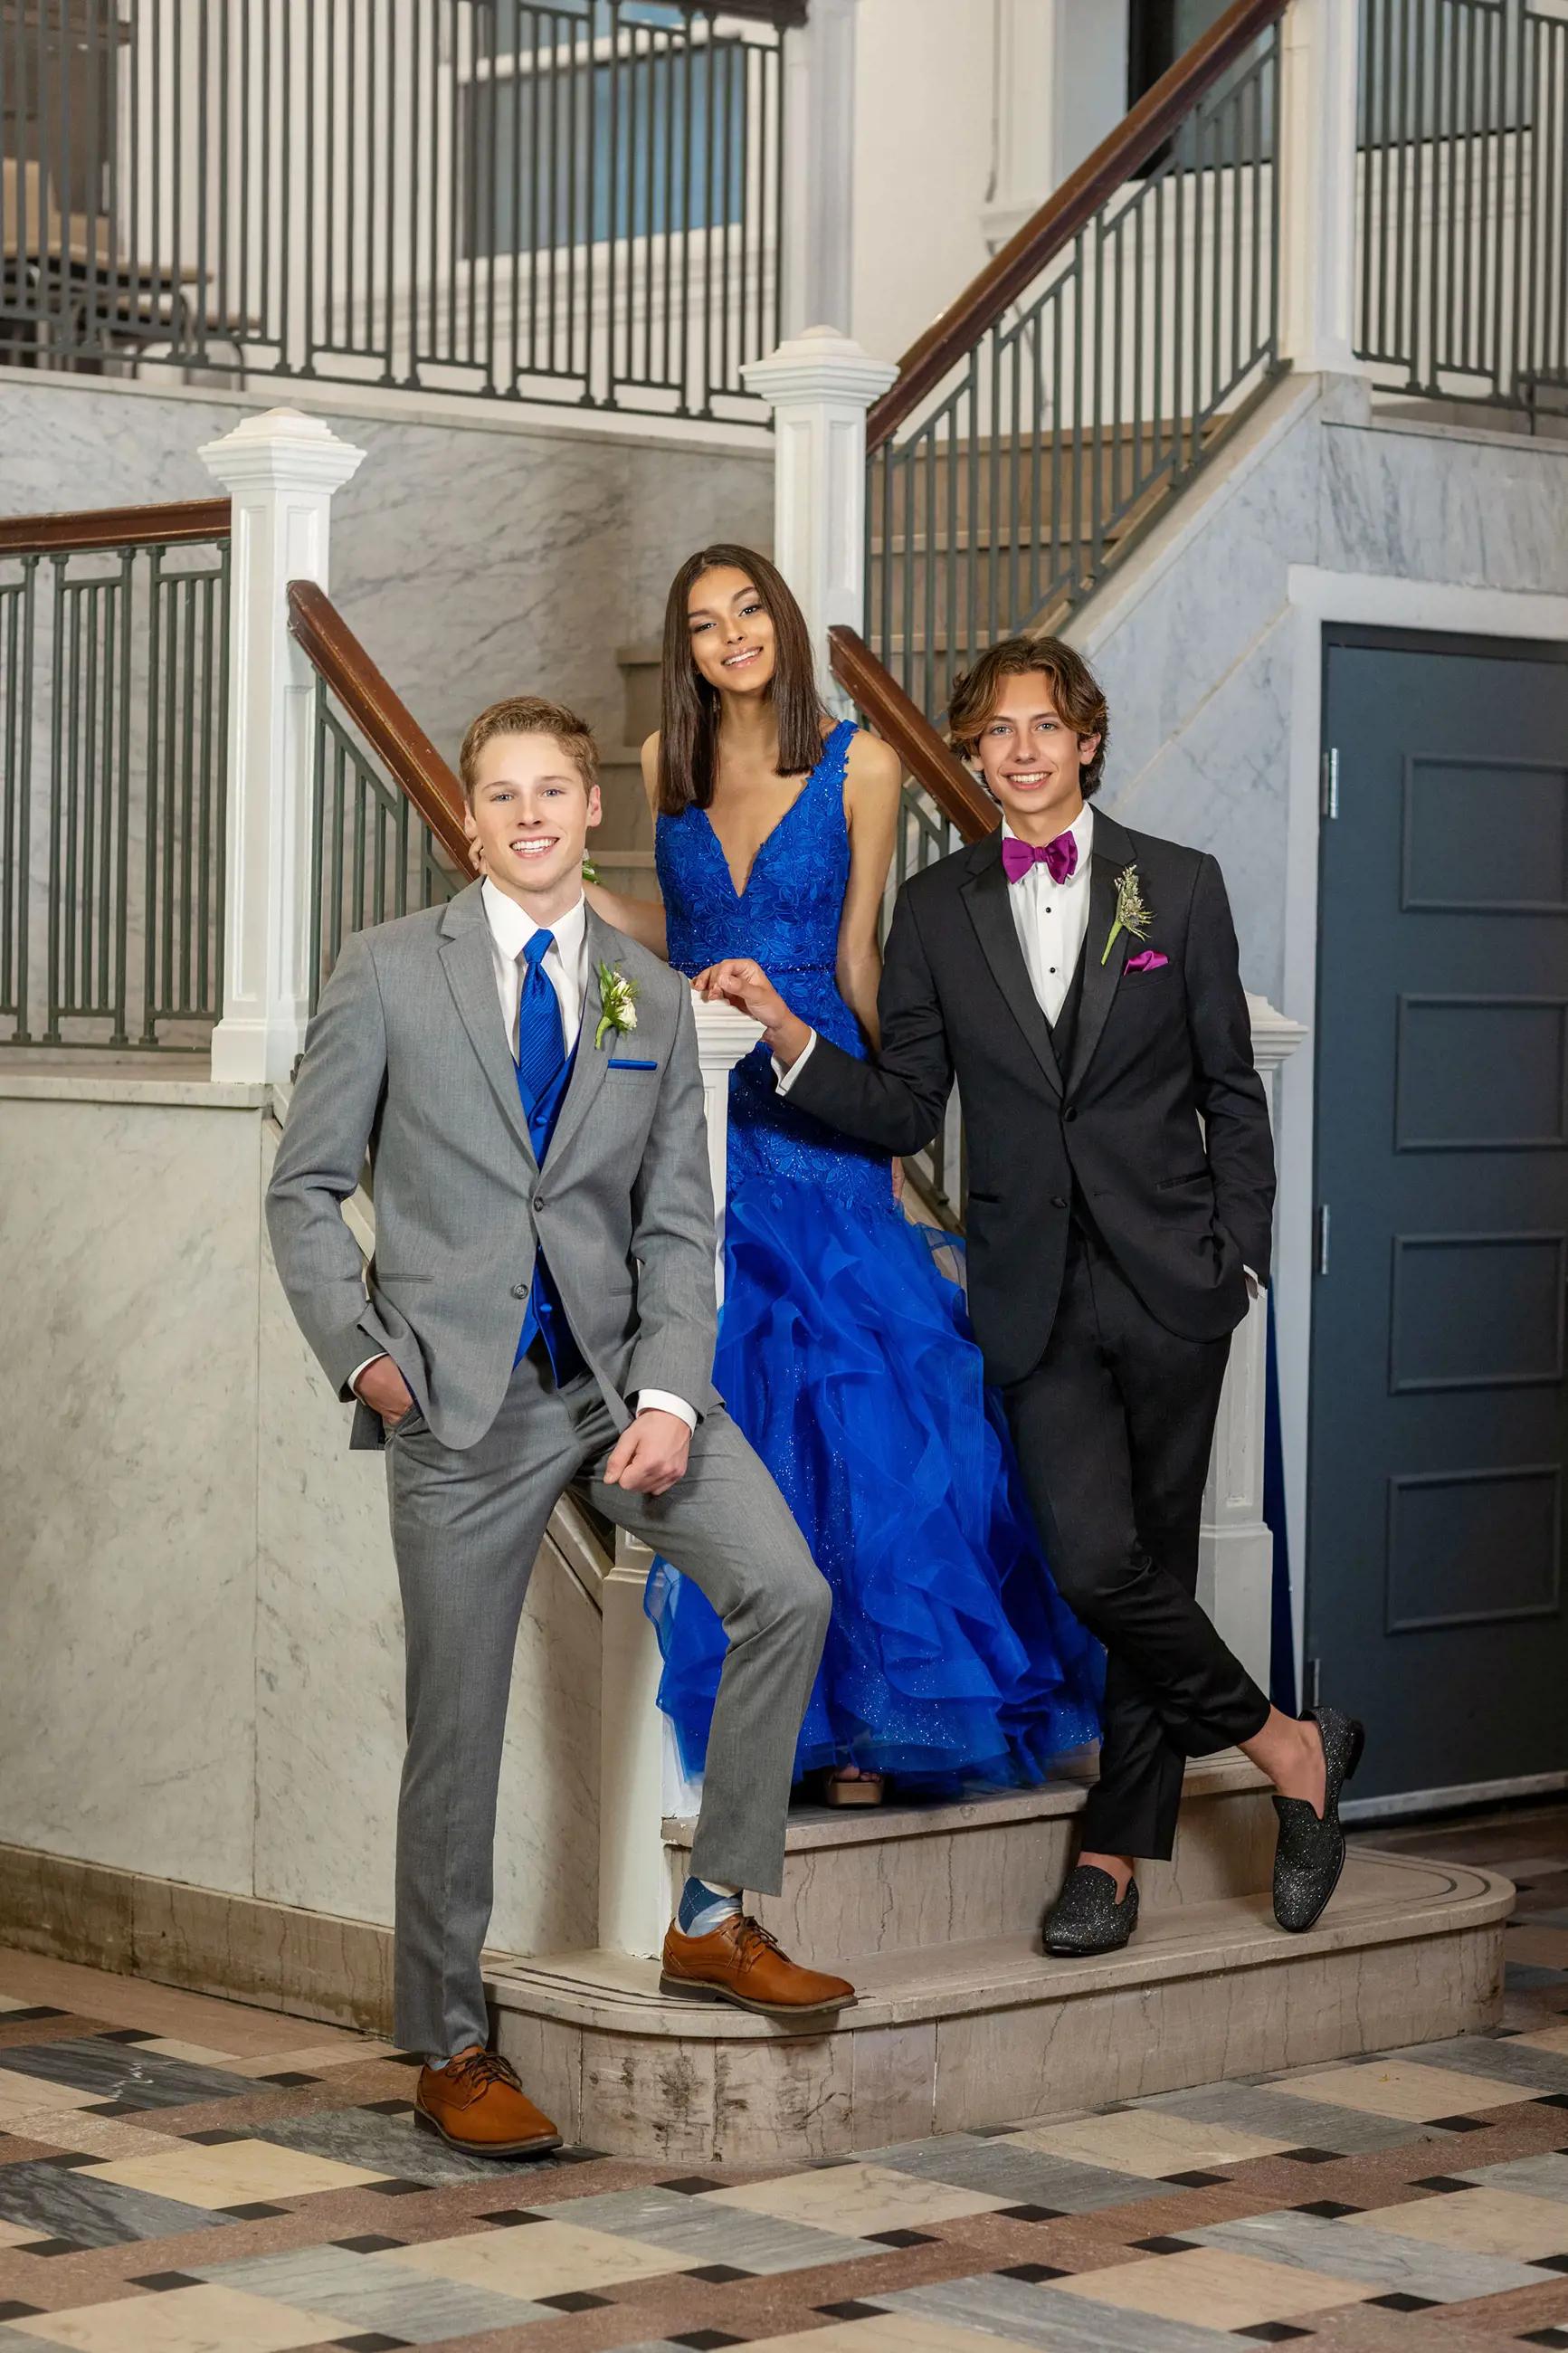 Models wearing a blue dress, gray and black suits